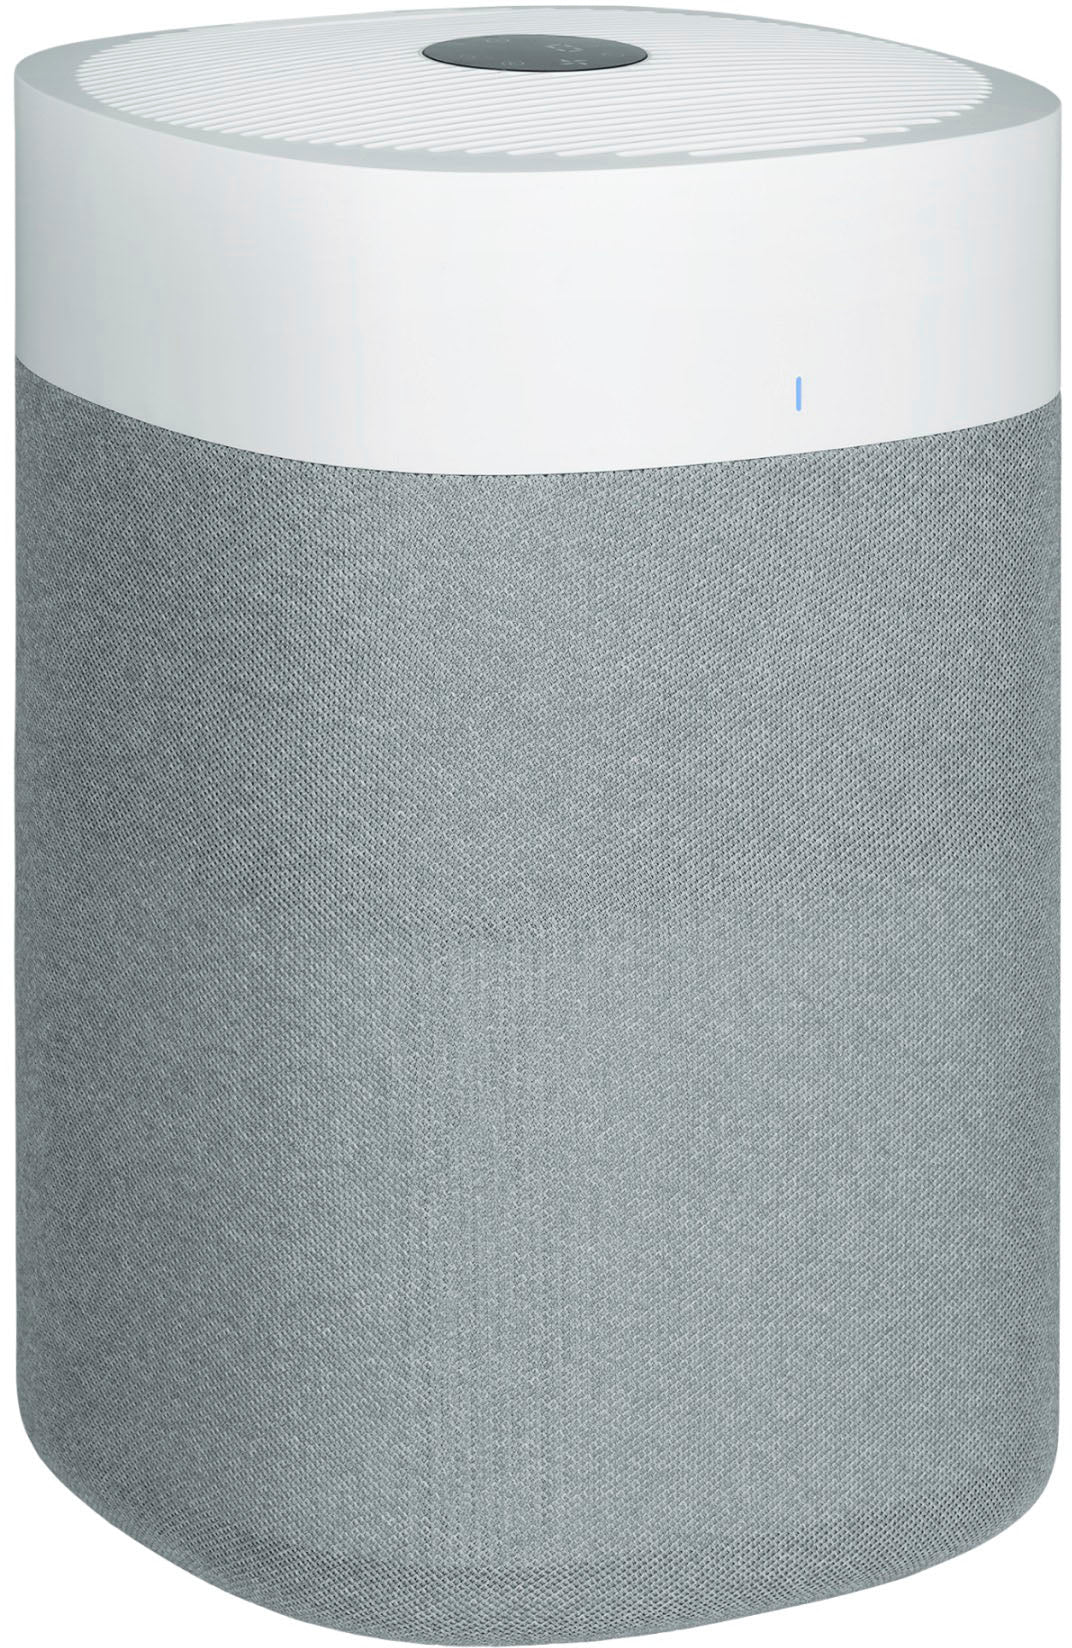 Blueair - Blue Pure 211i Max 635 Sq. Ft HEPASilent Smart Extra-Large Room Air Purifier - White/Gray_4